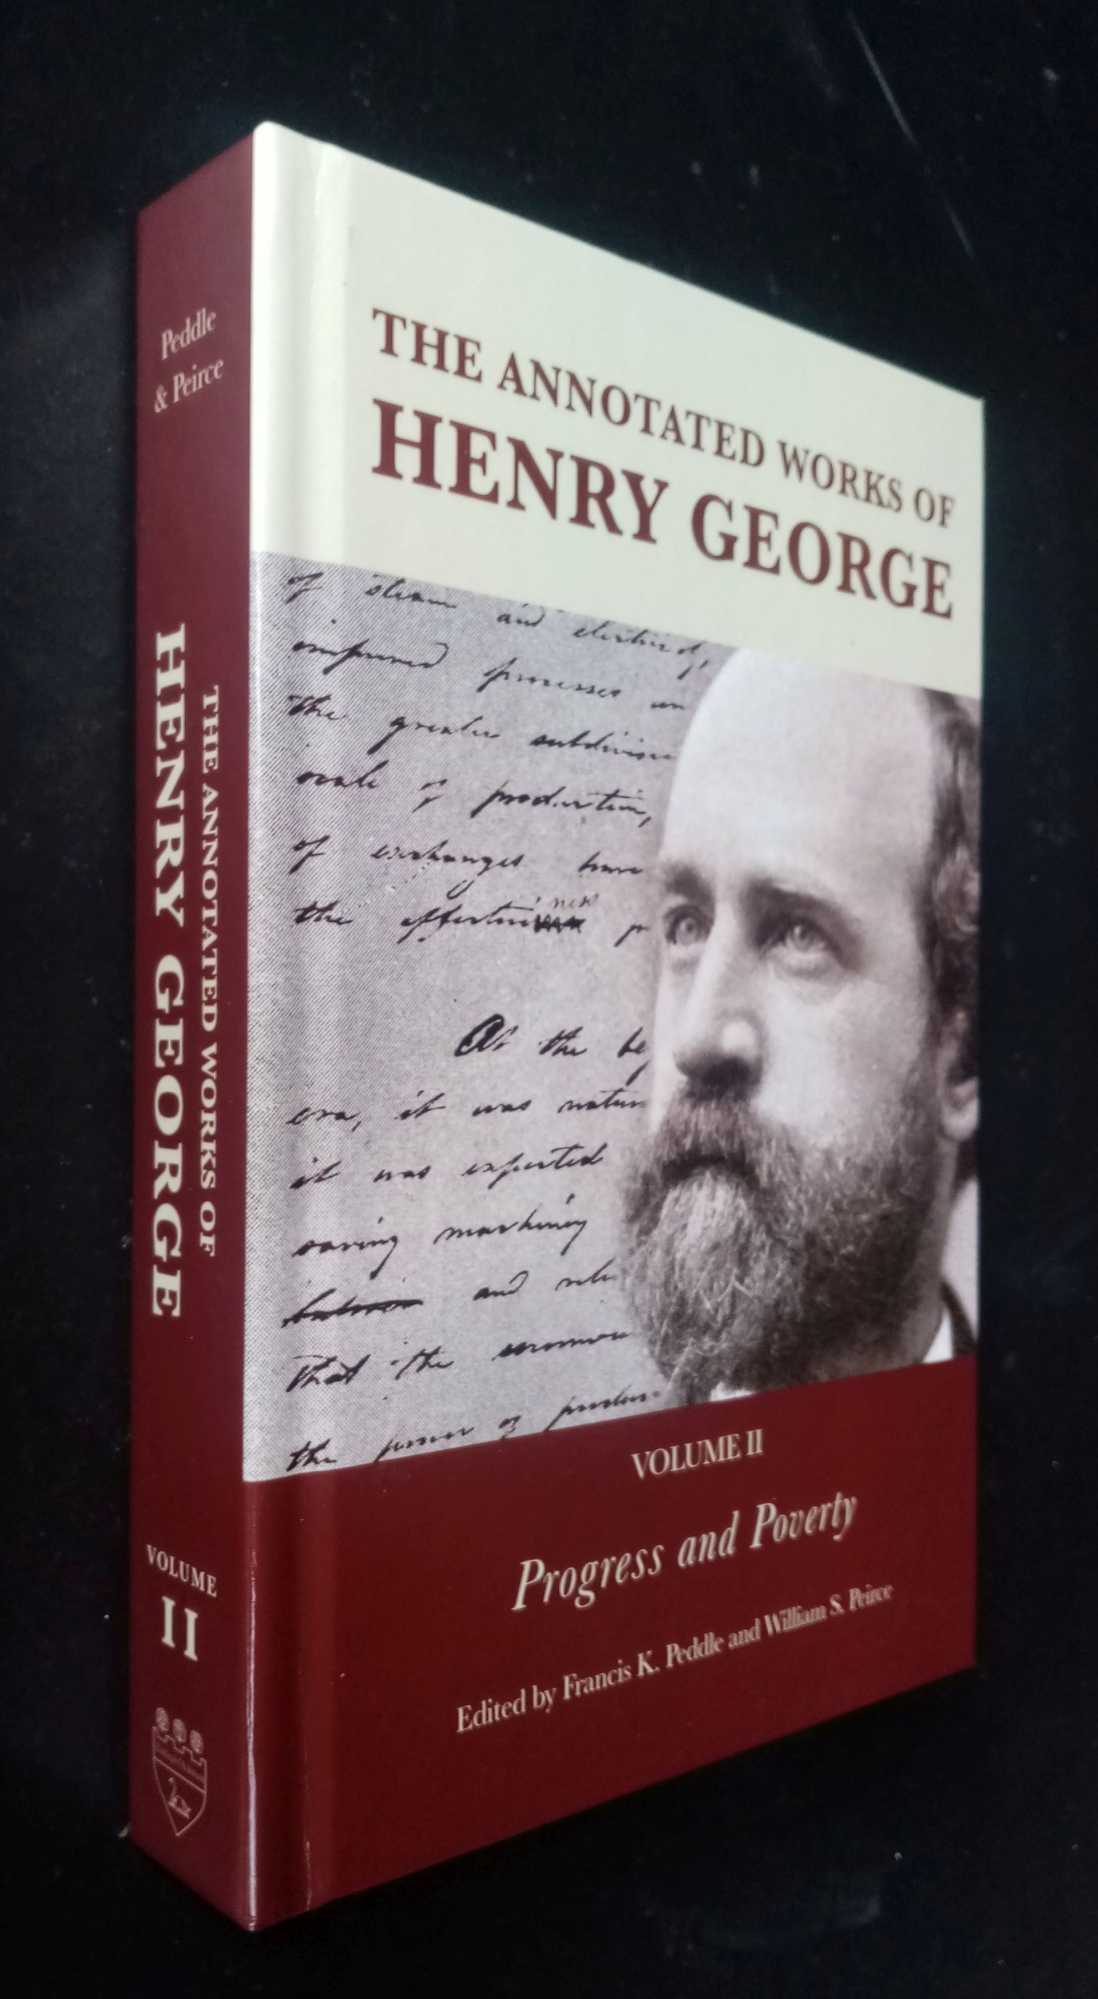 Francis Peddle, ed. - The Annotated Works of Henry George, Volume 2 :Progress and Poverty